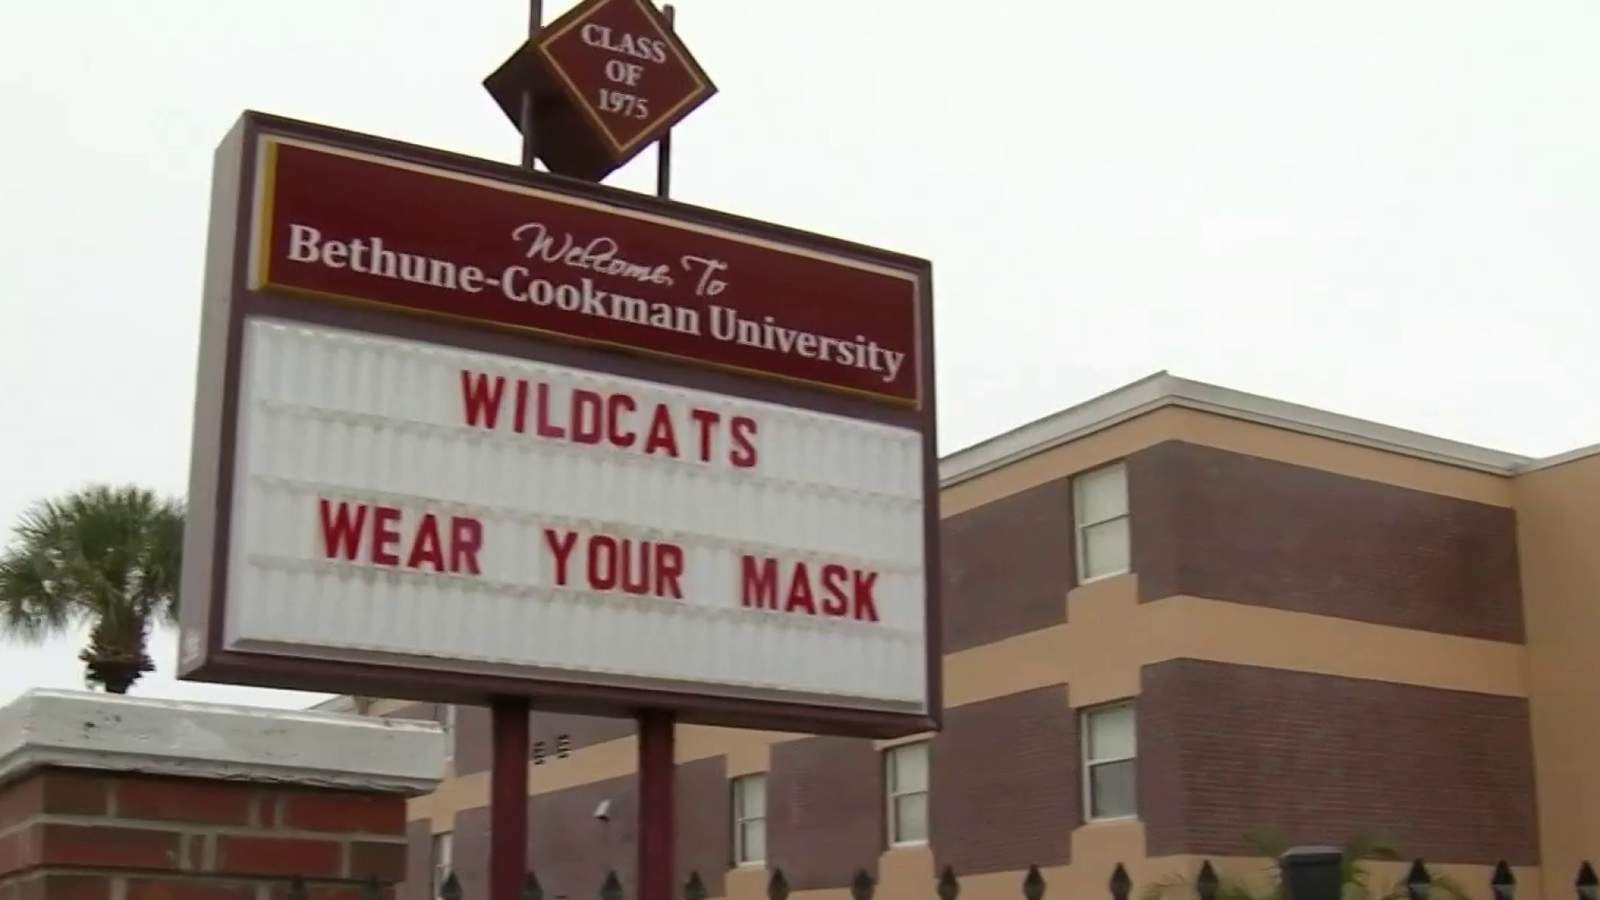 Curfew in effect as students return to class at Bethune-Cookman University